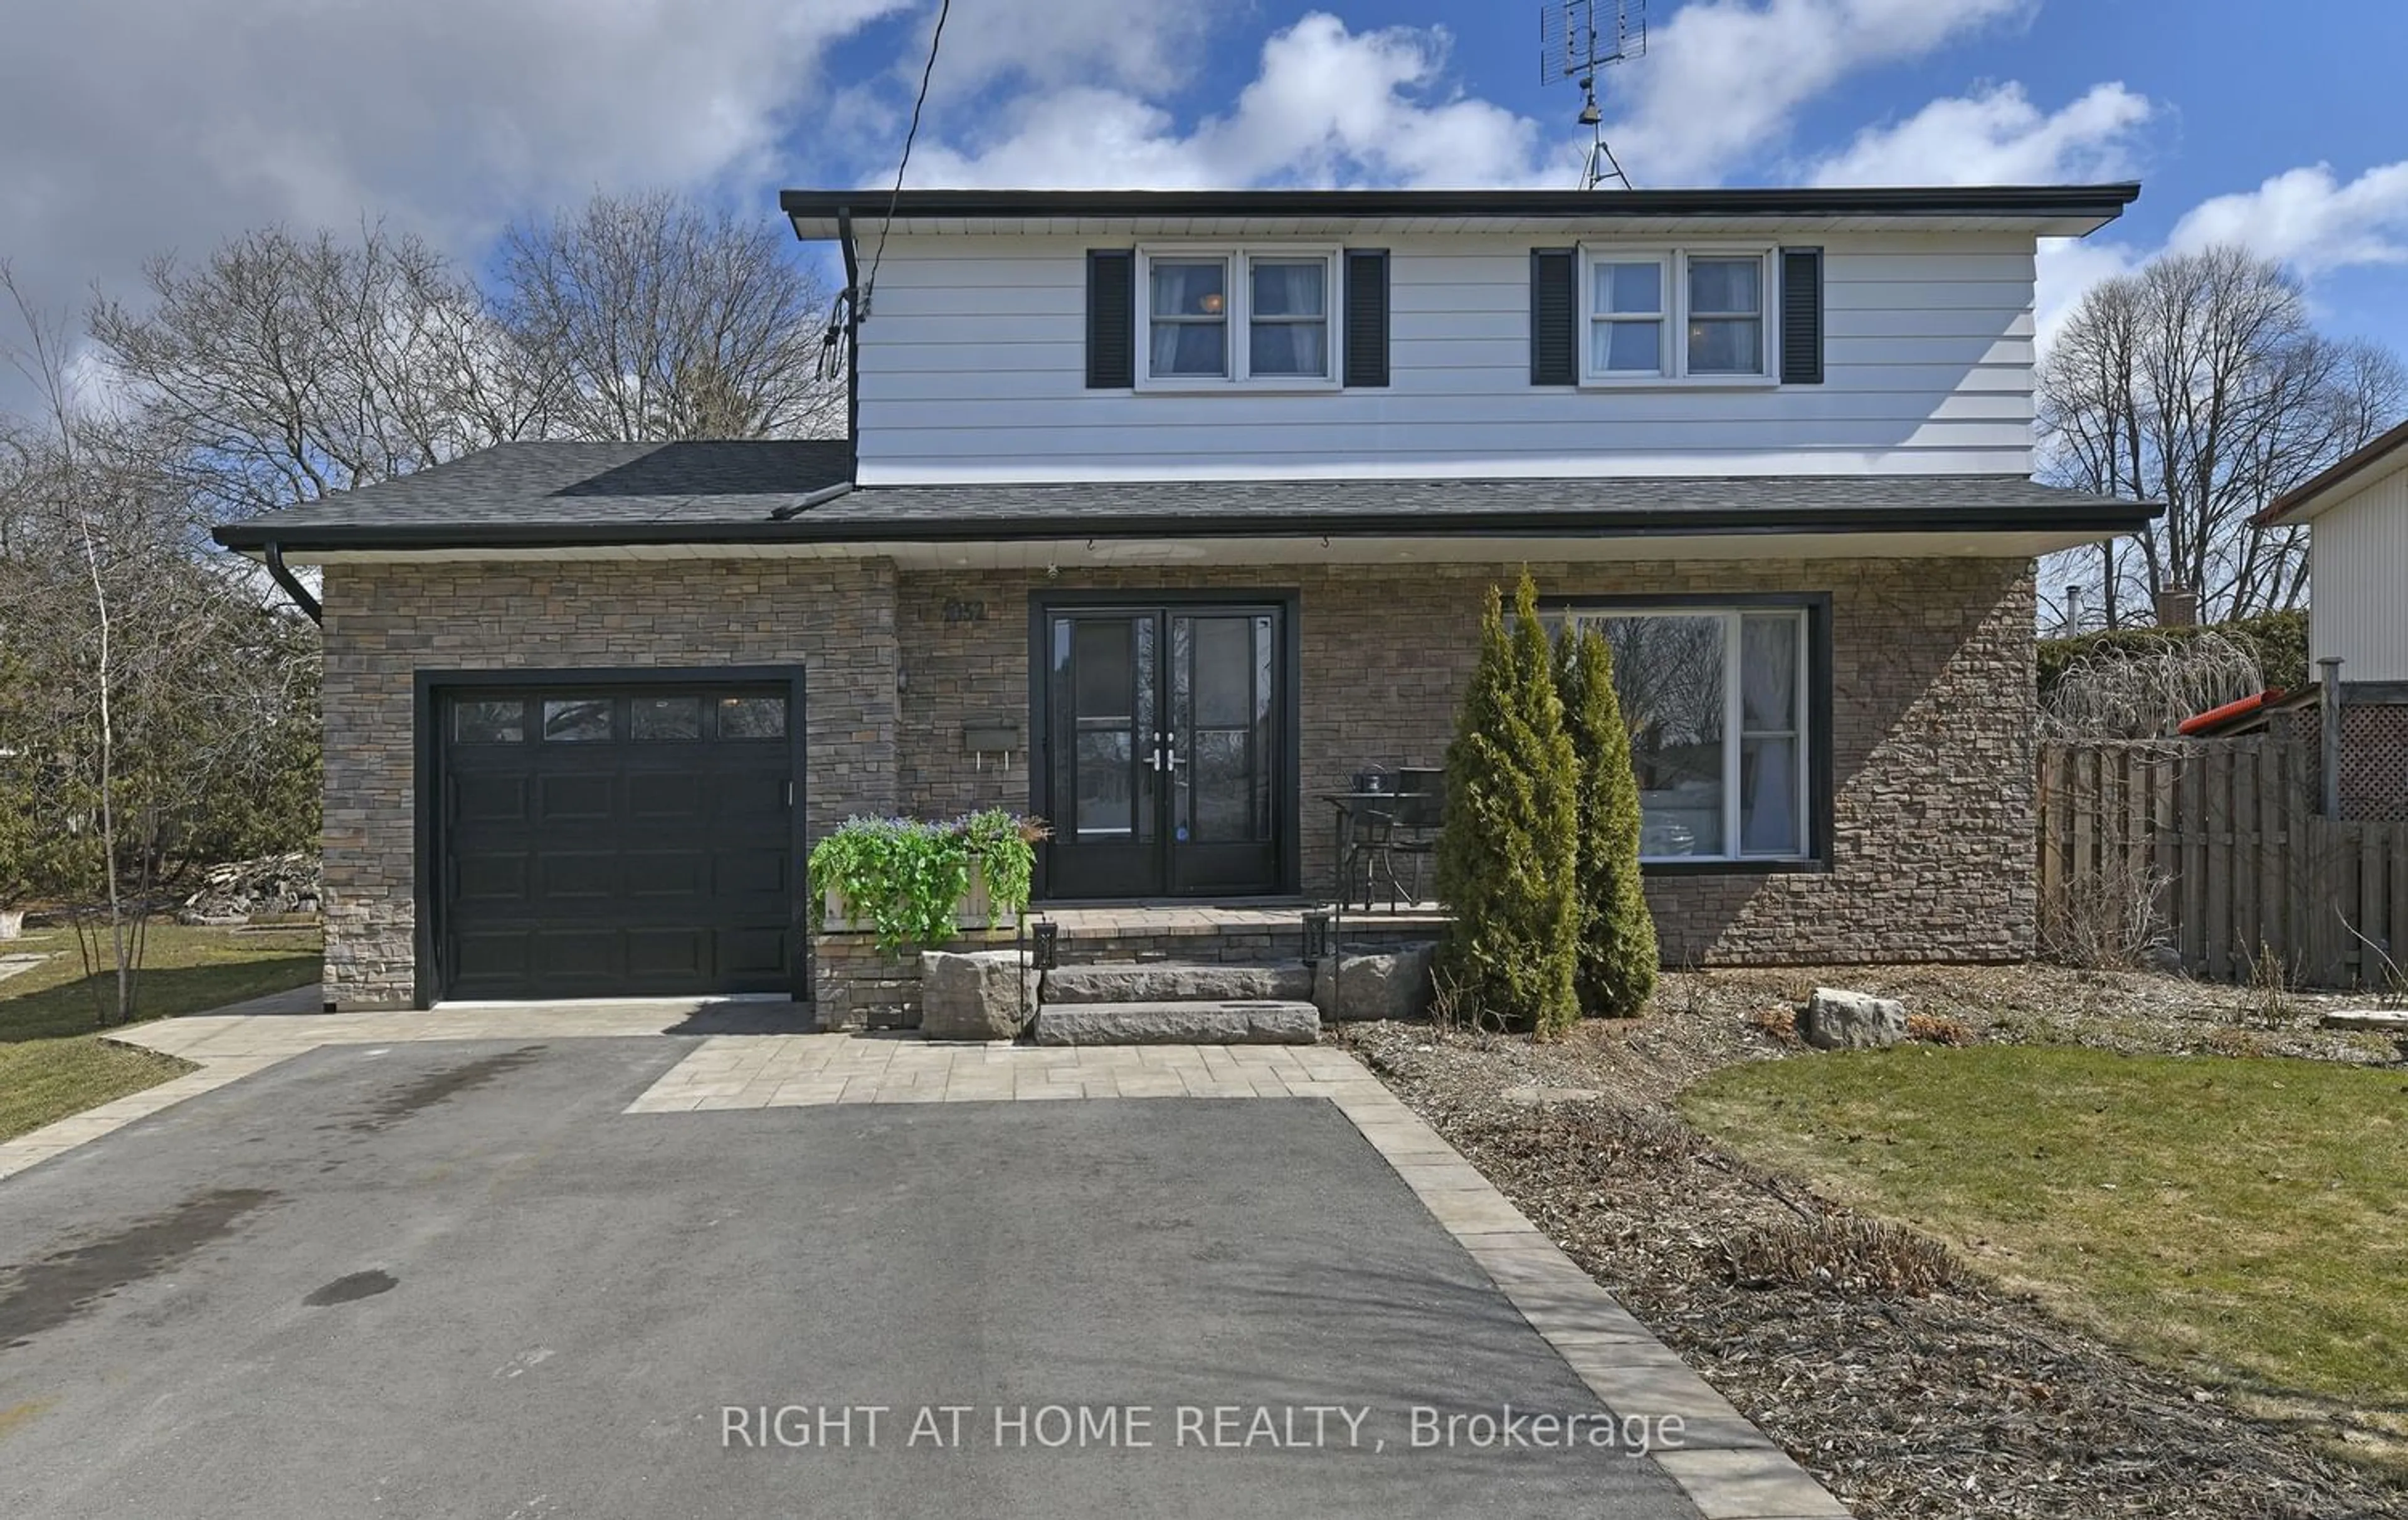 Home with unknown exterior material for 1052 Denise Dr, Oshawa Ontario L1H 2Y4